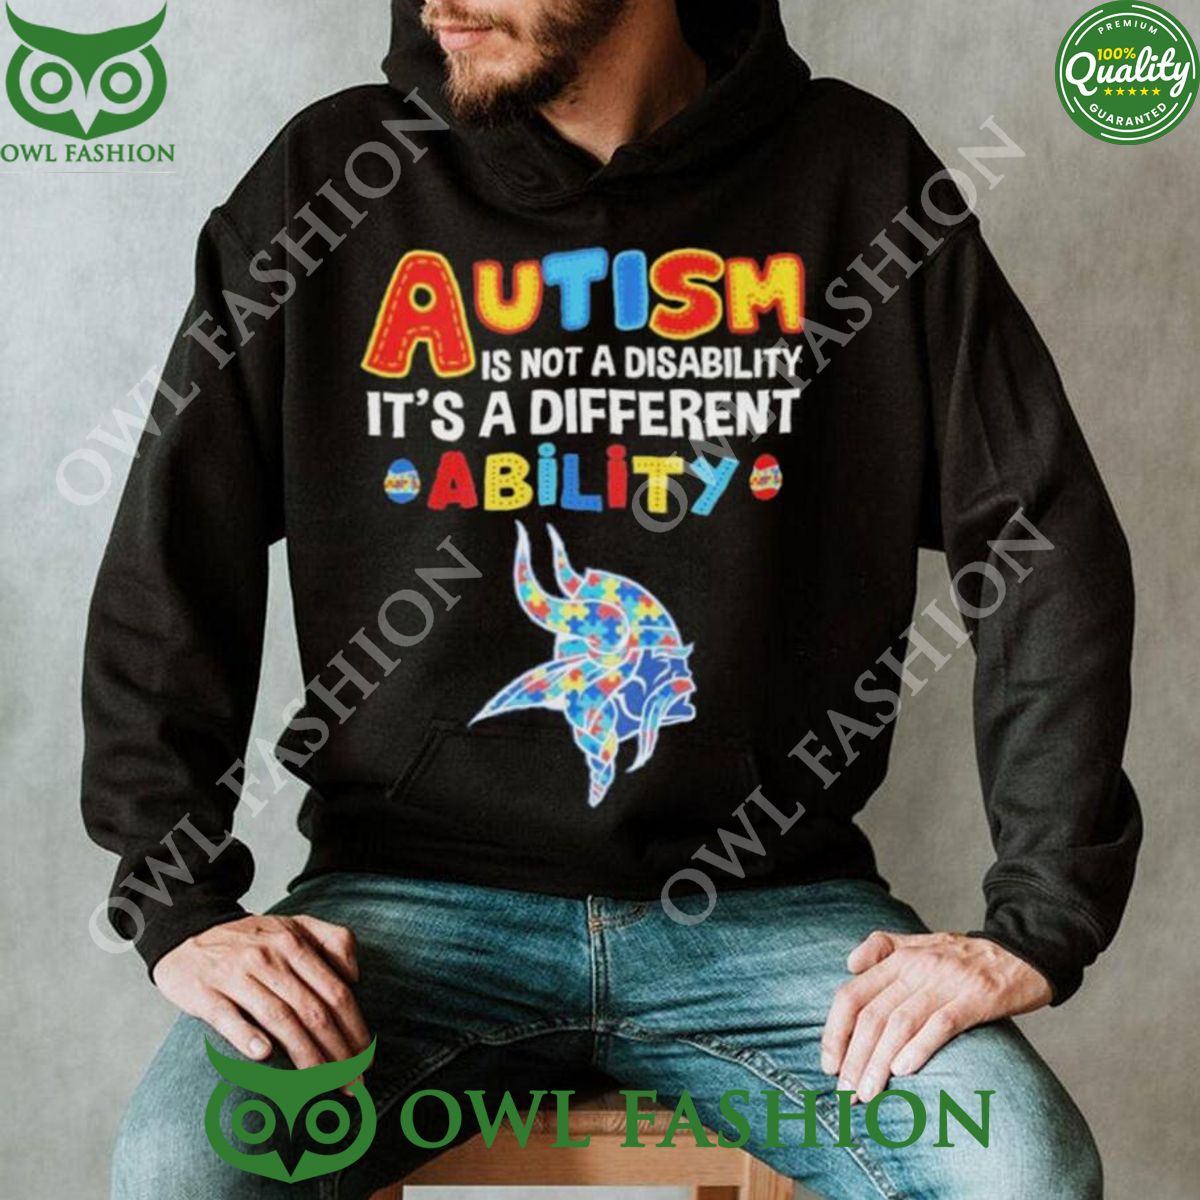 Minnesota Vikings Autism Premium NFL 2D Hoodie Shirt Out of the world